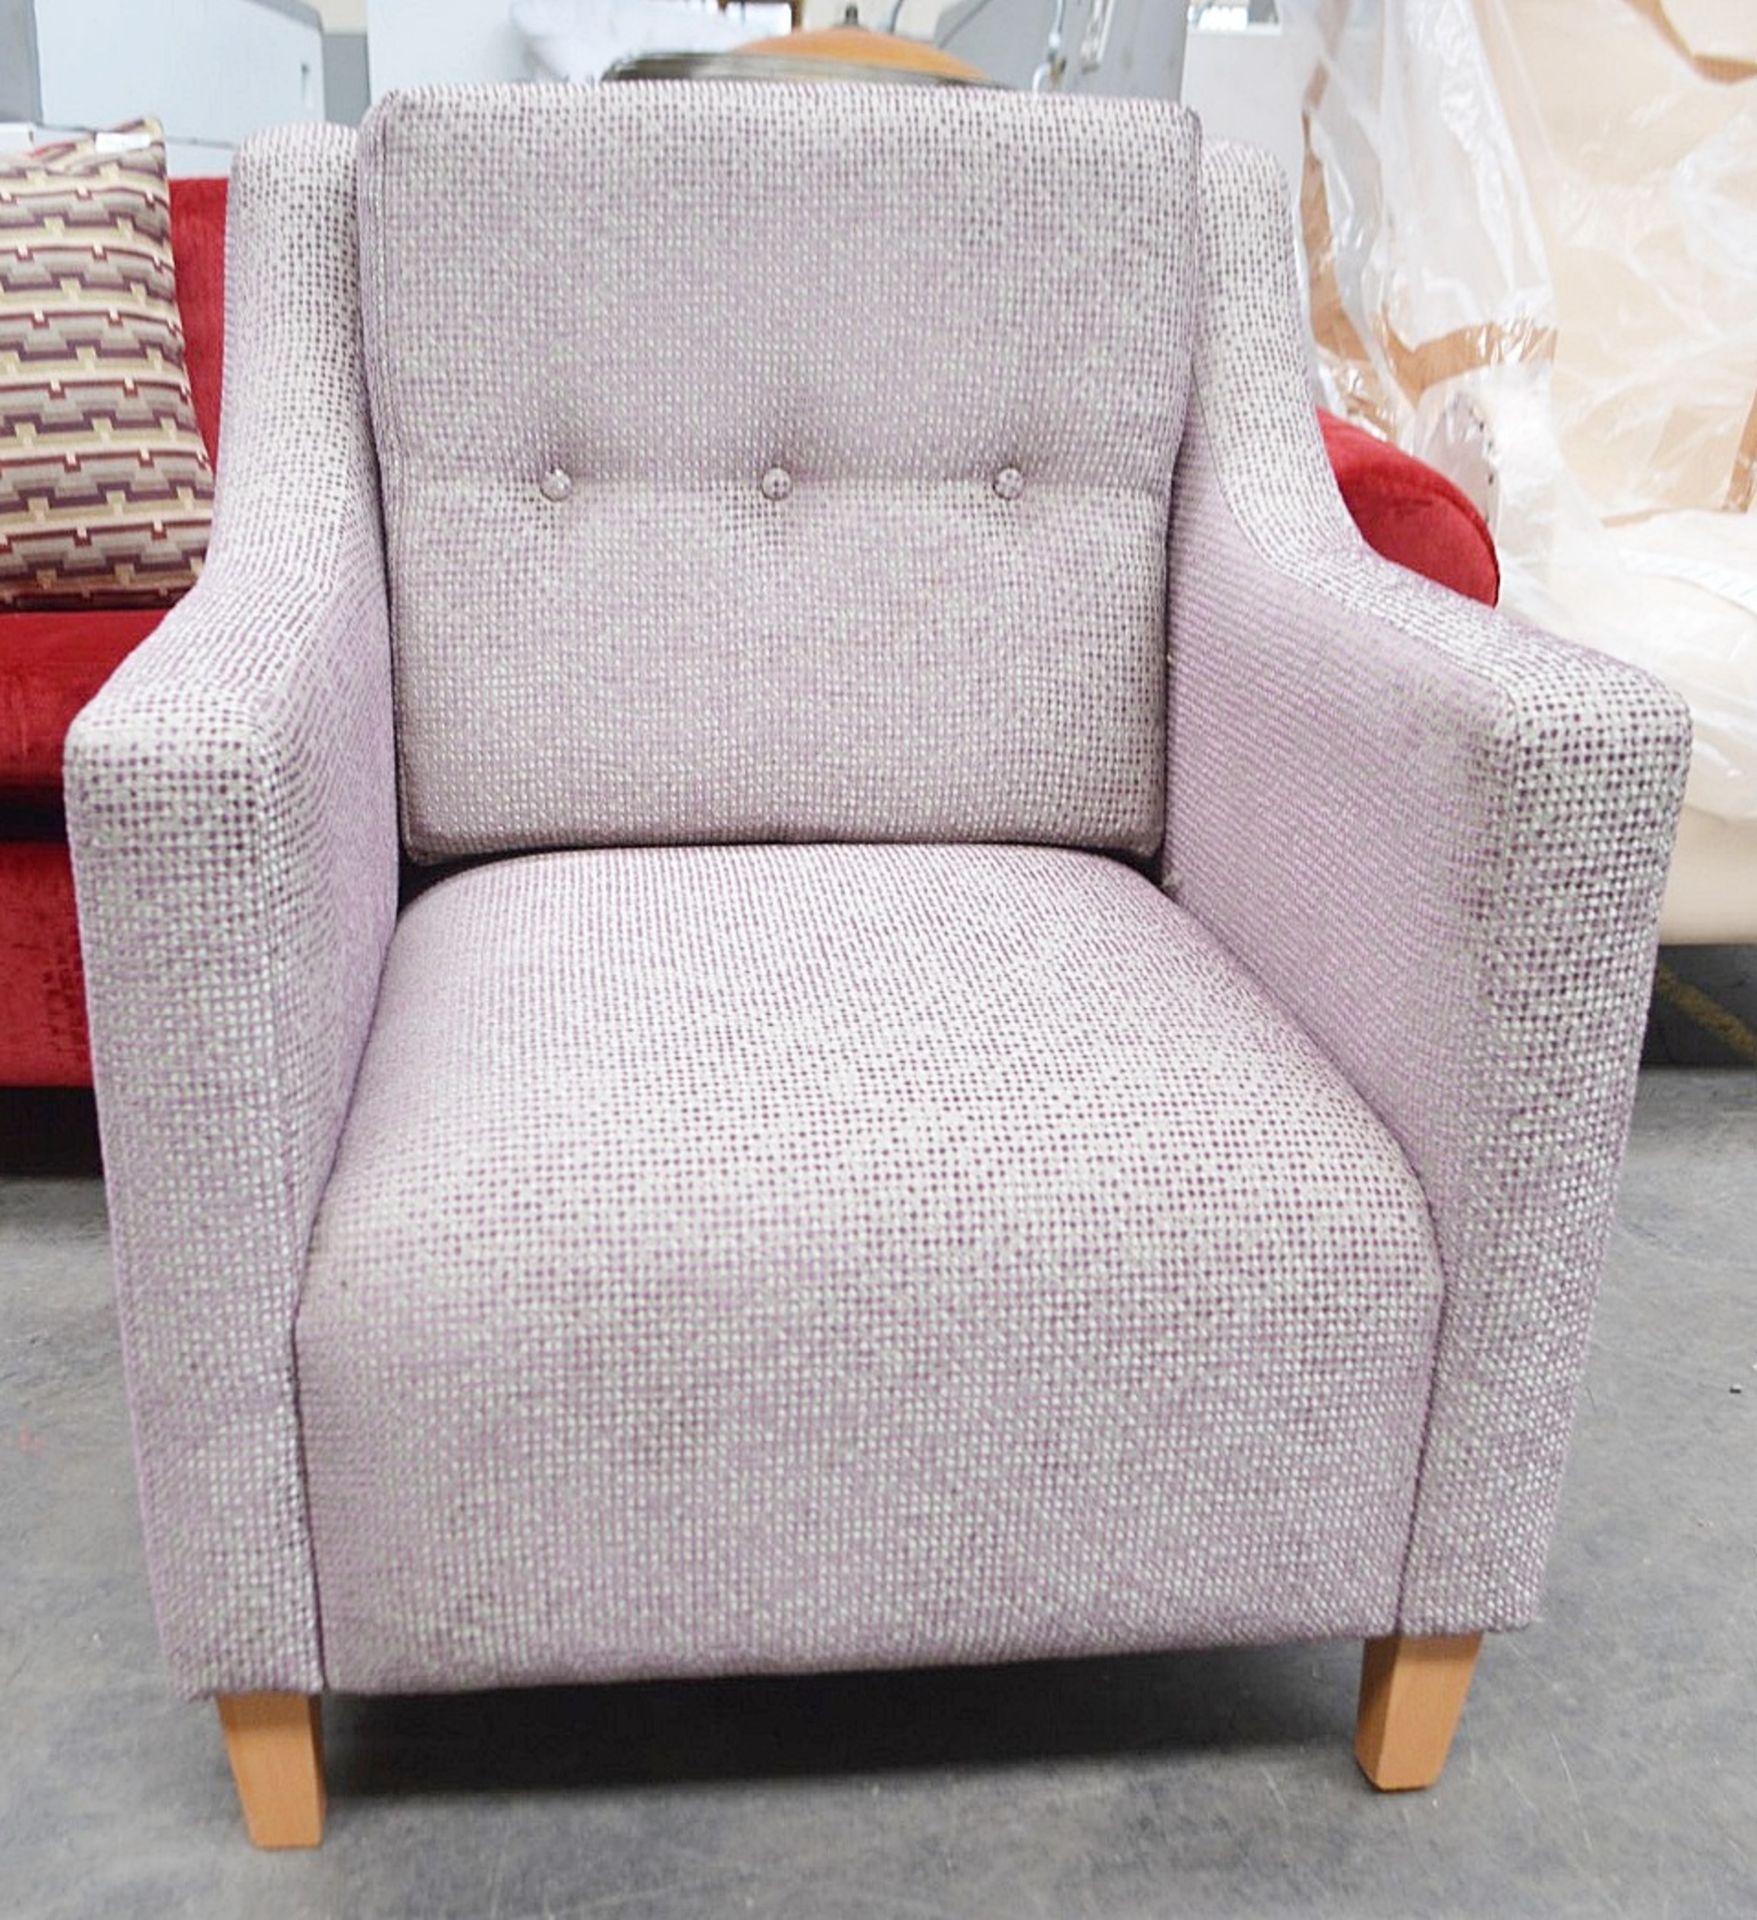 1 x Large Commercial Armchair Upholstered In A Grey & Purple Premium Fabric - Image 3 of 7